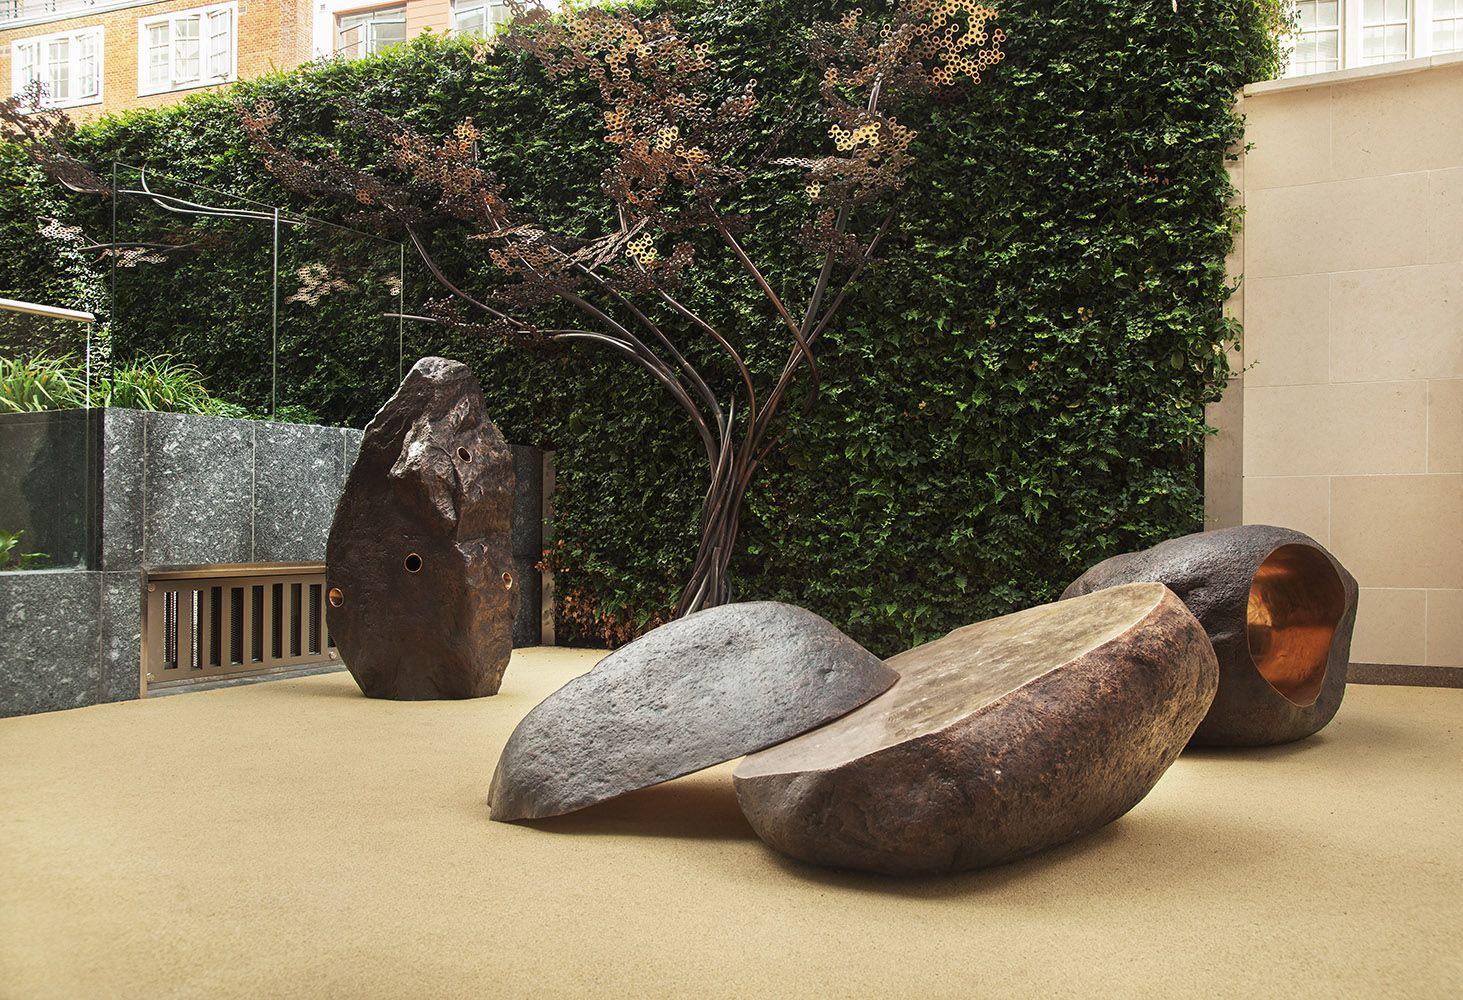 Boulder #3 – The Tunnel is a bronze sculpture by contemporary artist Tom Price, dimensions are 90 × 150 × 140 cm (35.4 × 59.1 × 55.1 in). 
This artwork is available on commission. It will be created on the same basis as shown in the images and under